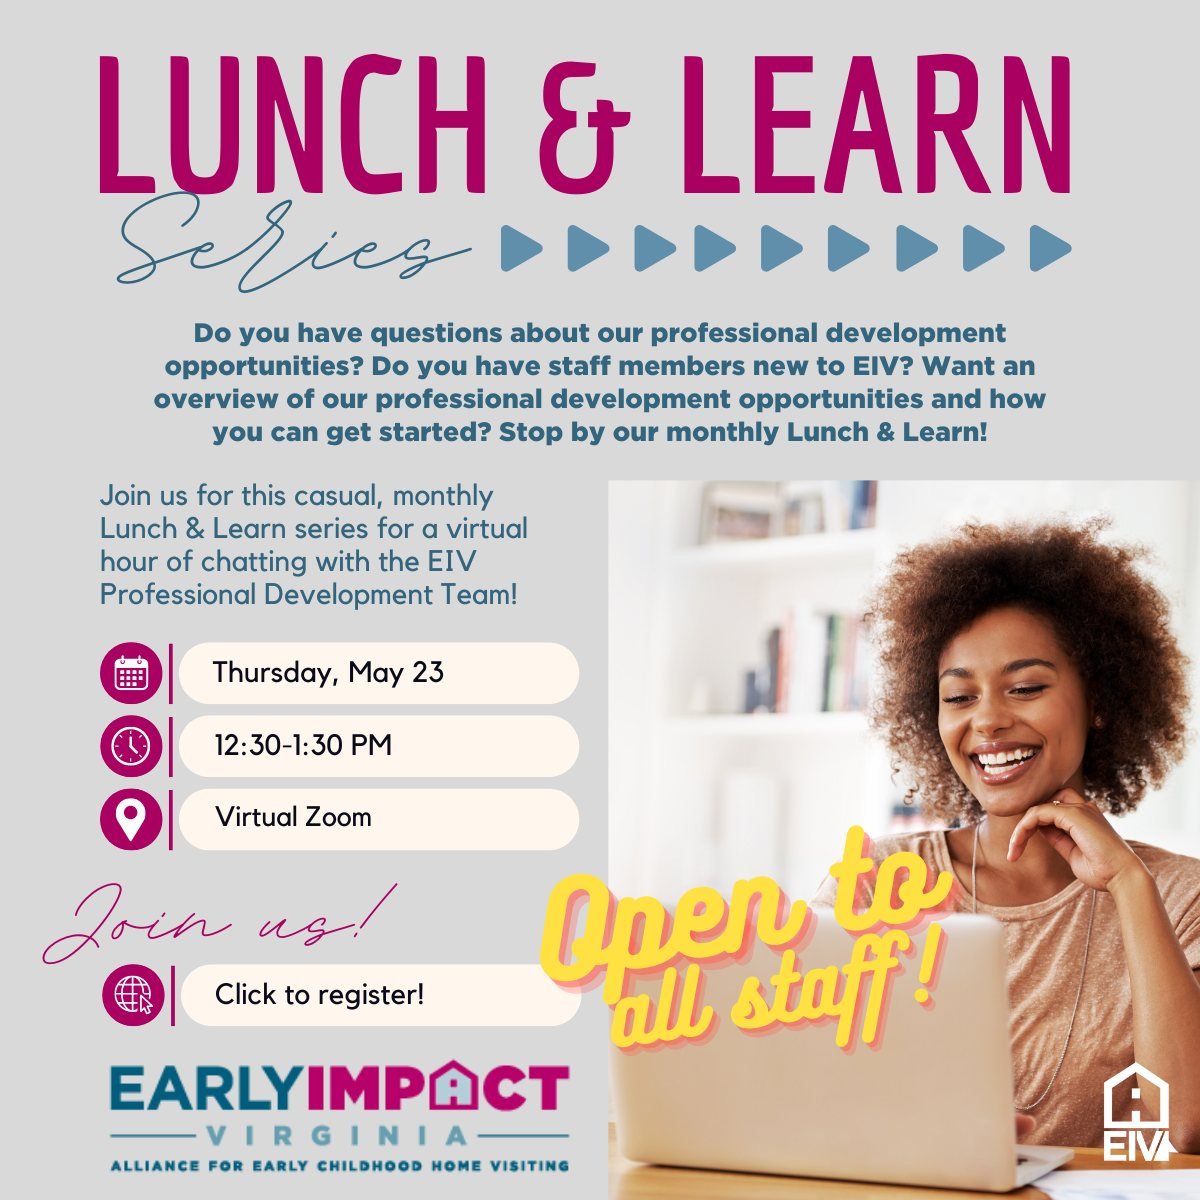 May Lunch &amp; Learn 

Do you have questions about EIV's professional development opportunities? Join us for our virtual March Professional Development Lunch &amp; Learn to learn more about how you can get started with our professional development o